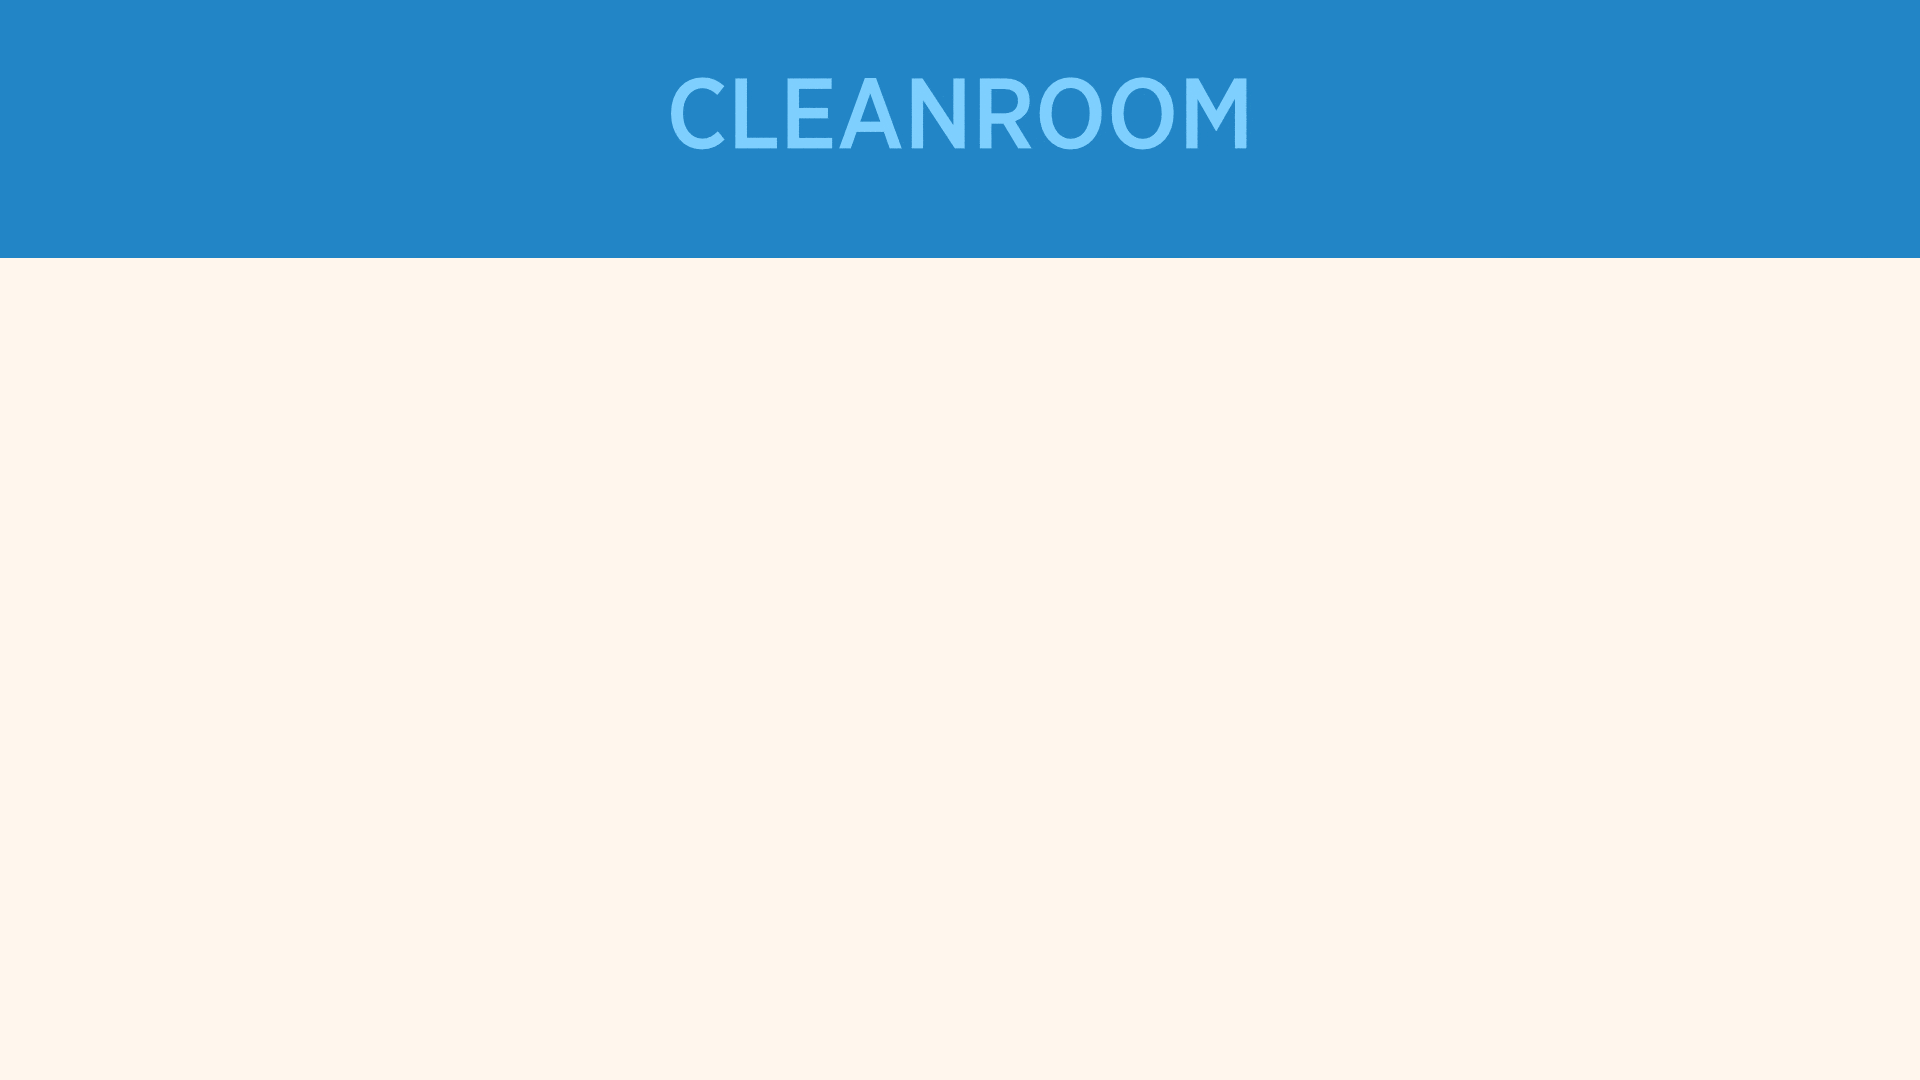 The Cleanroom Pattern - Animated